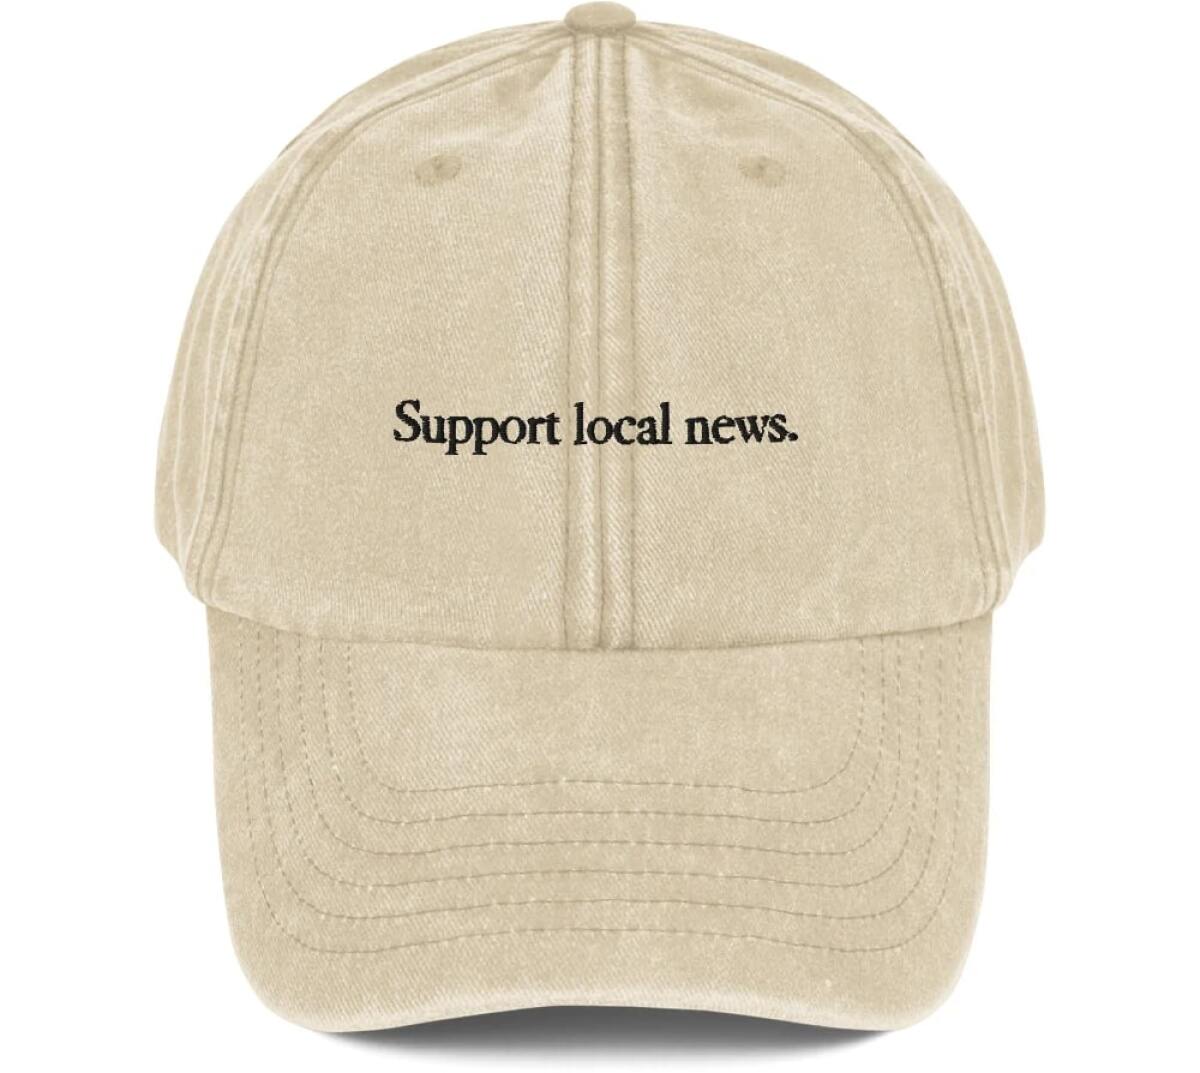 "Support local news" hat.